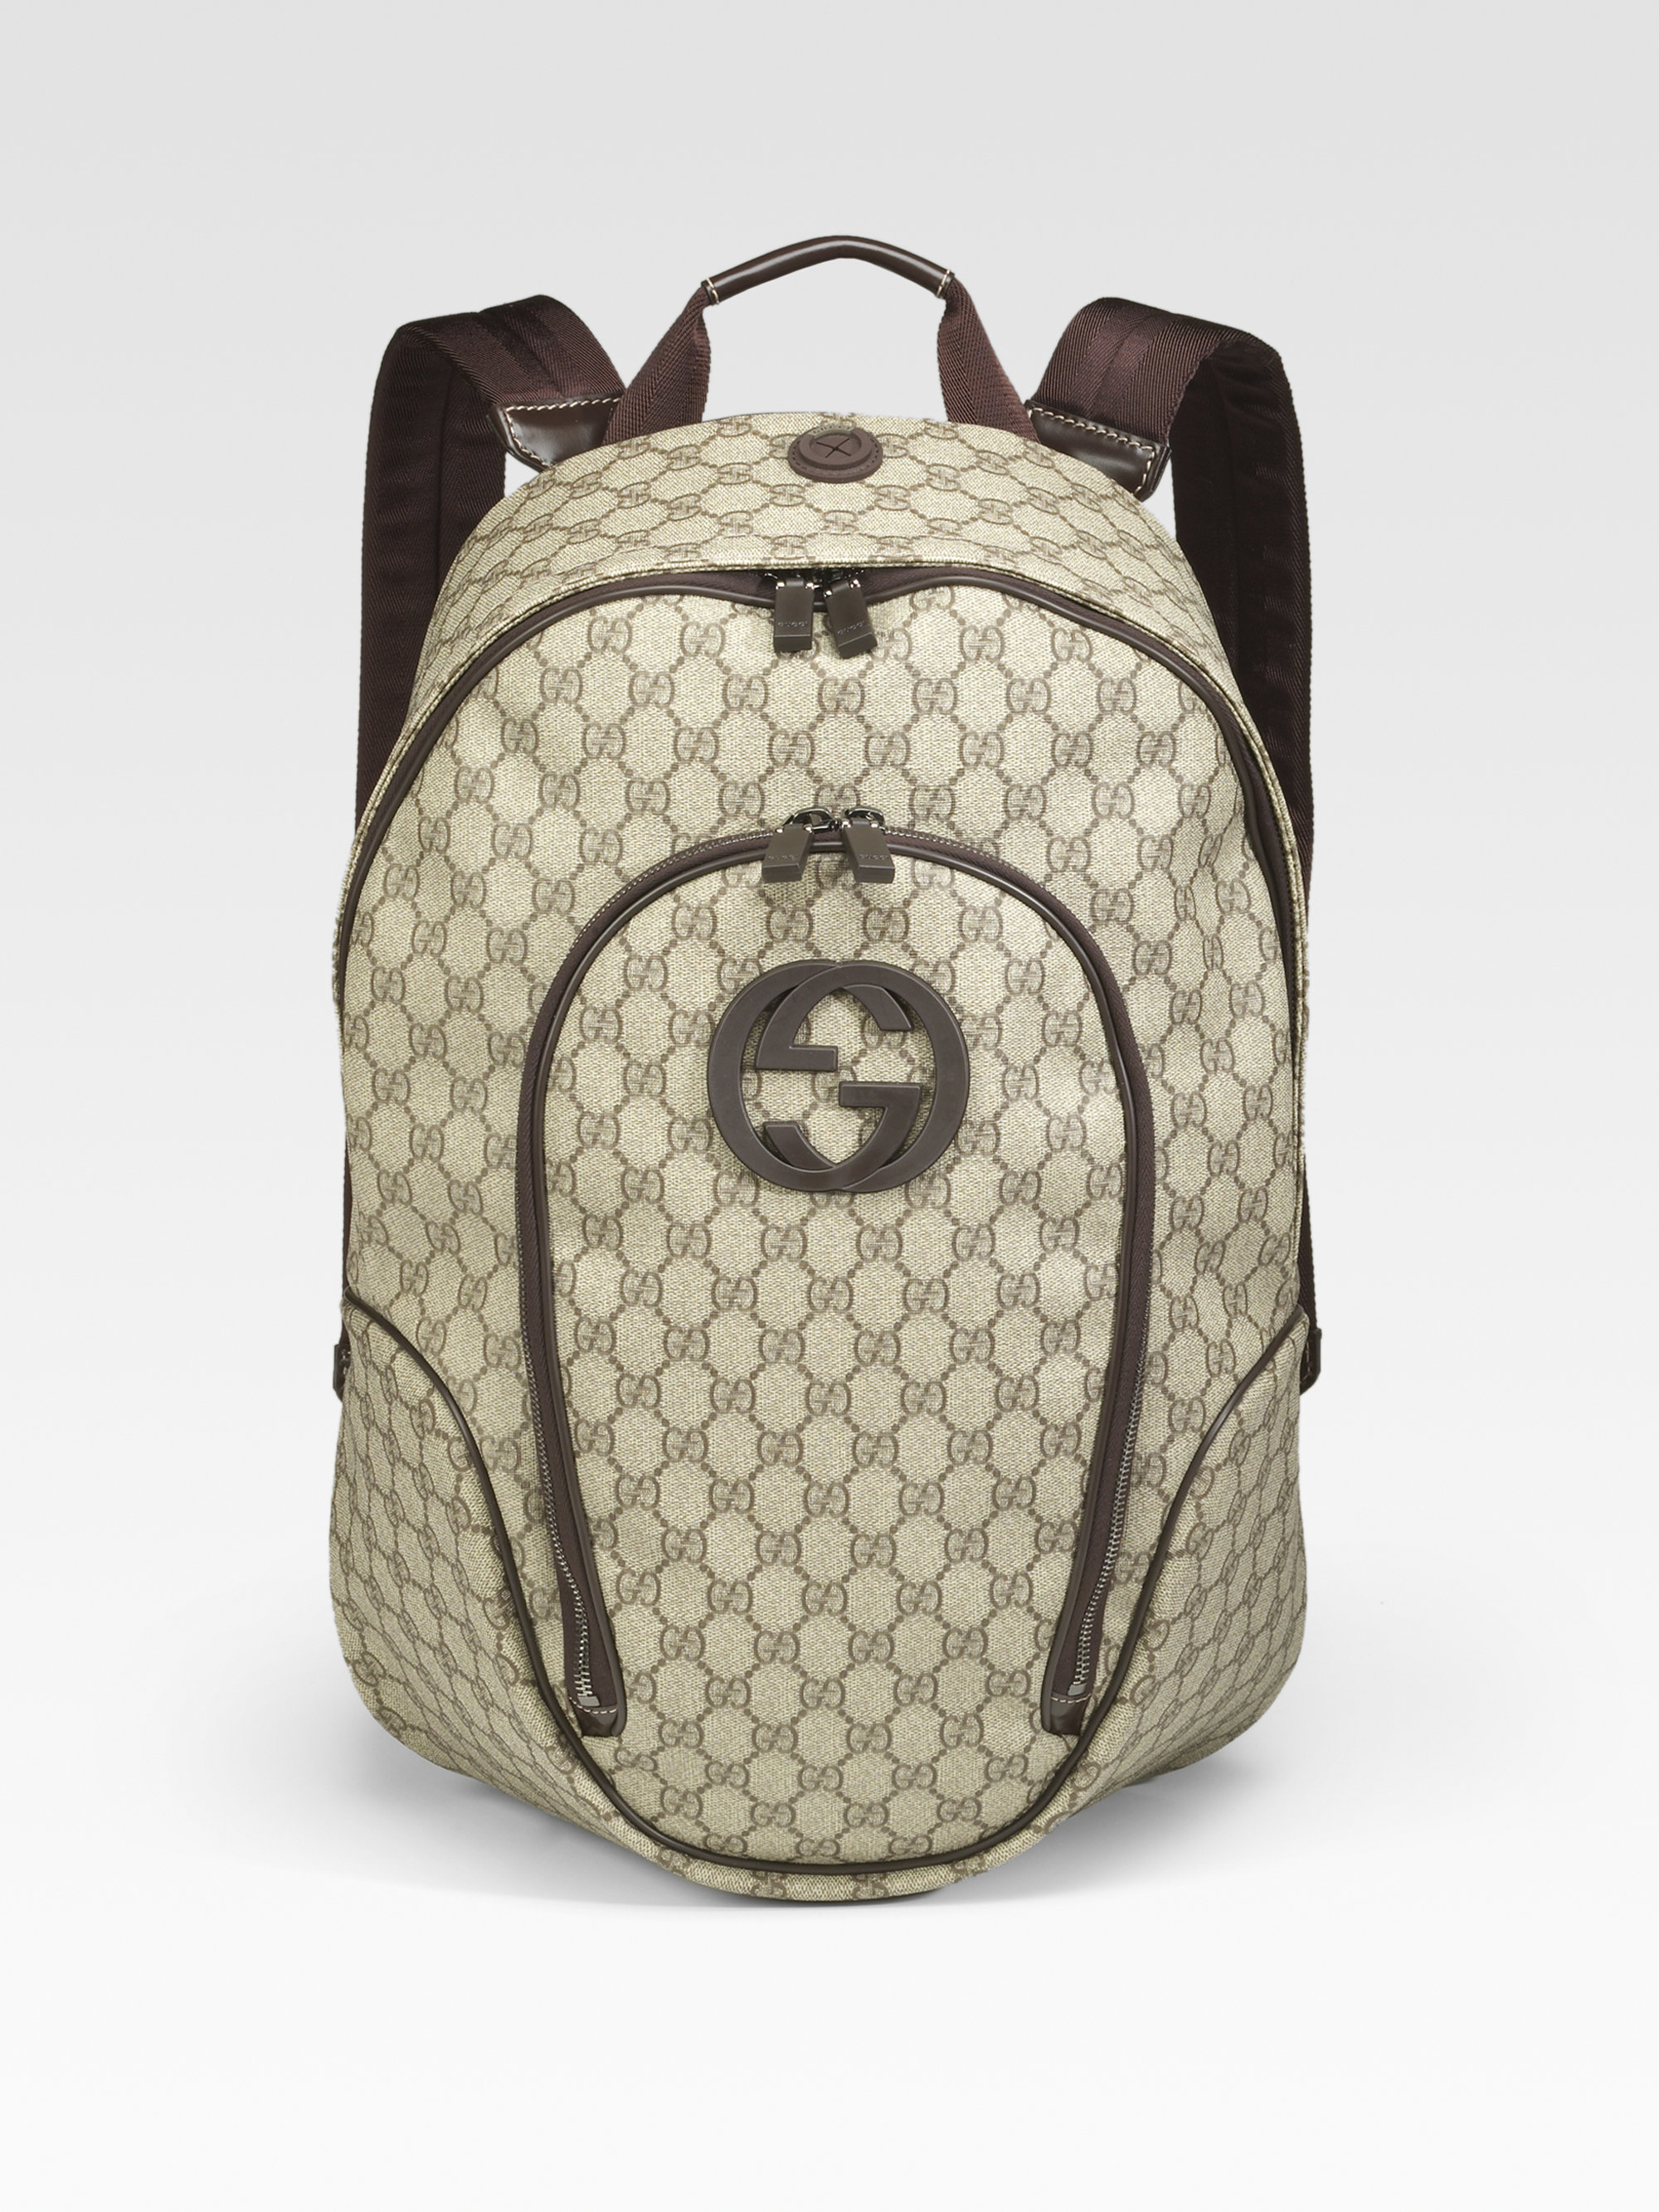 Lyst - Gucci Gg Plus Backpack in Natural for Men